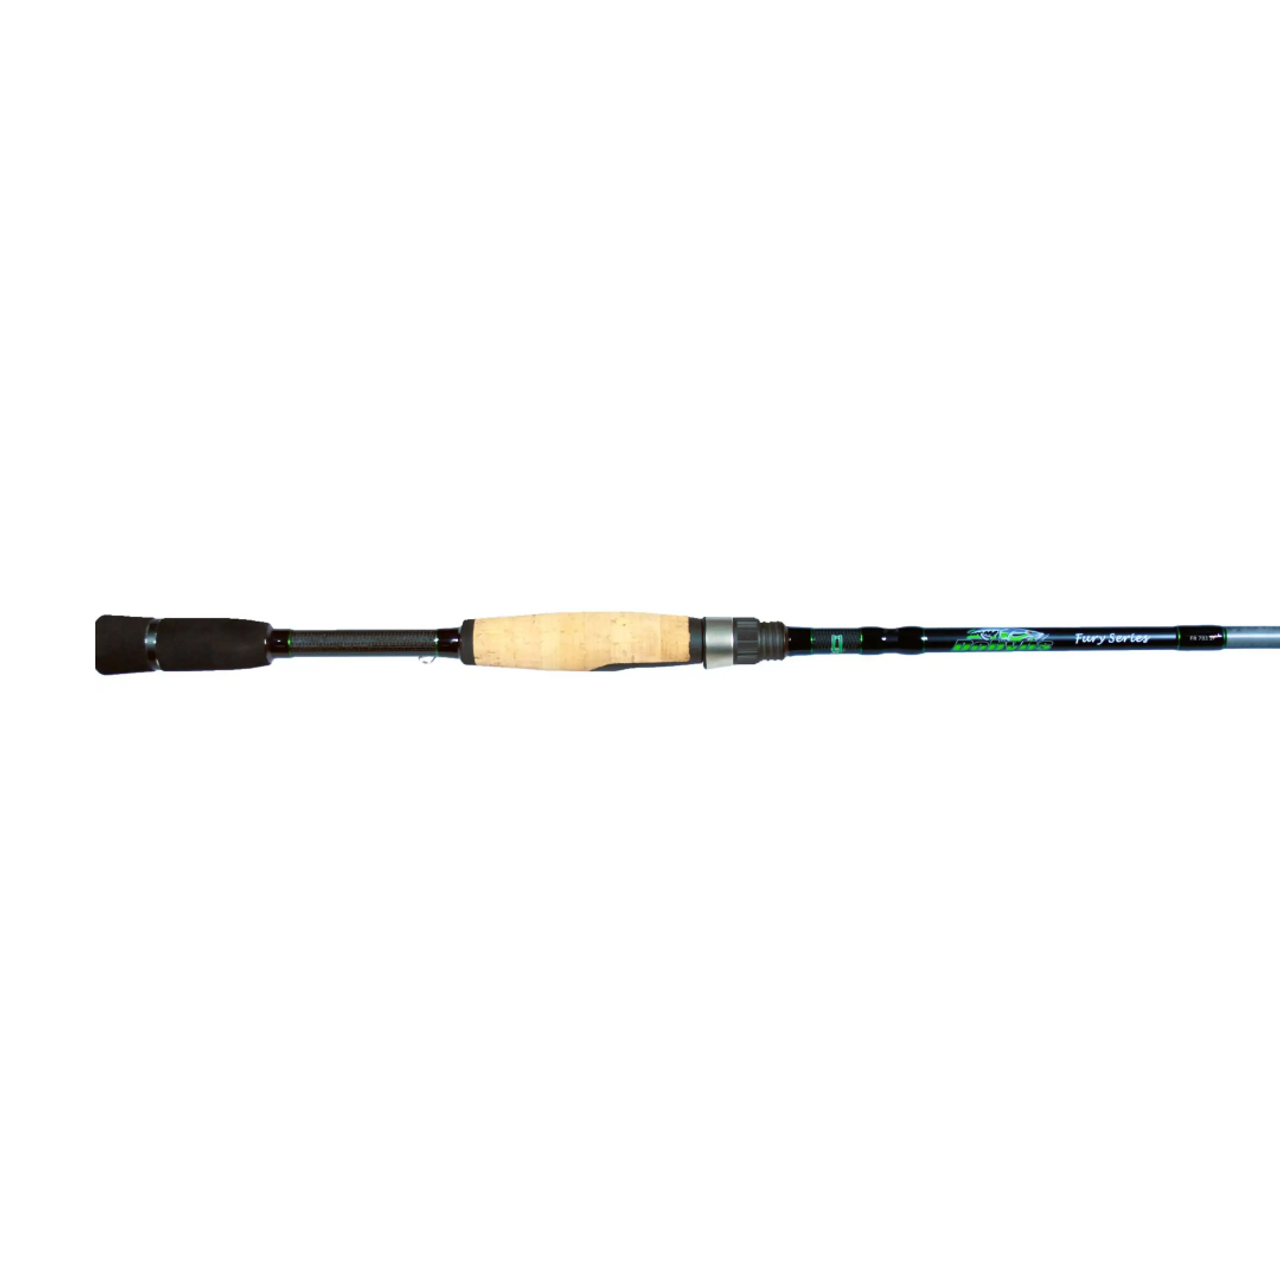 Dobyns Fury Series Spinning Rods — Discount Tackle